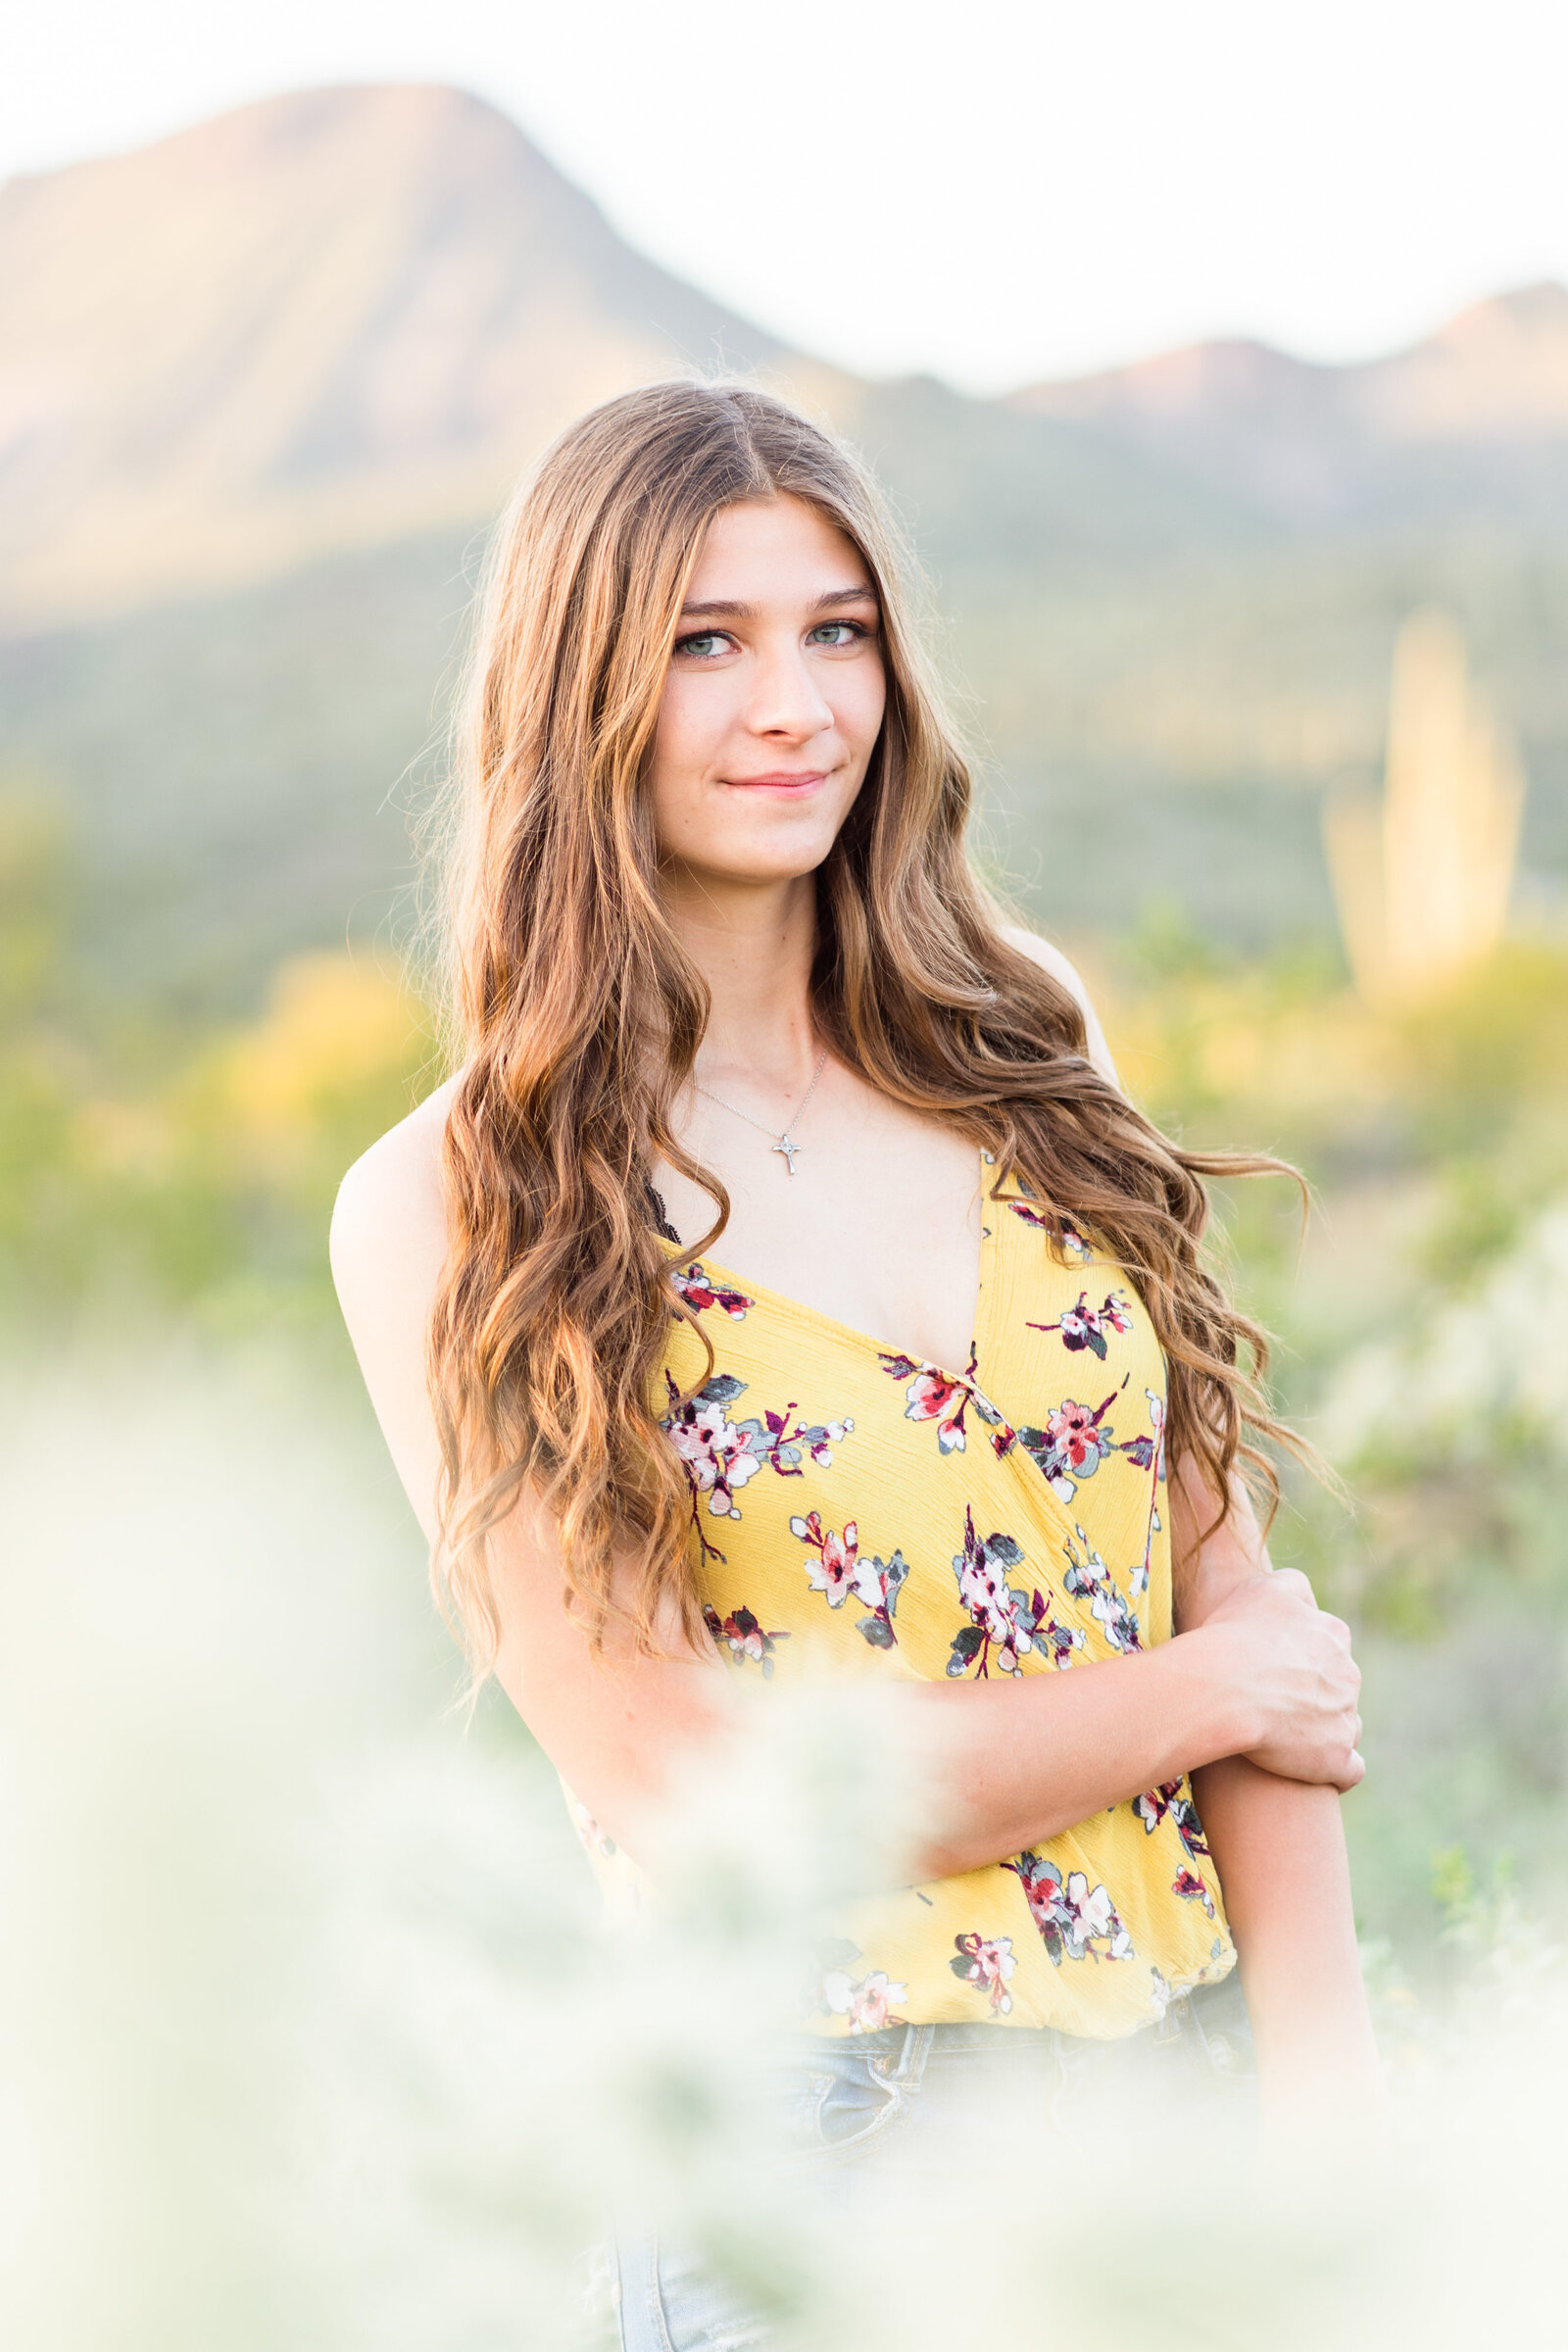 Senior girl smiling at camera wearing a yellow shirt in front of mountains in the desert